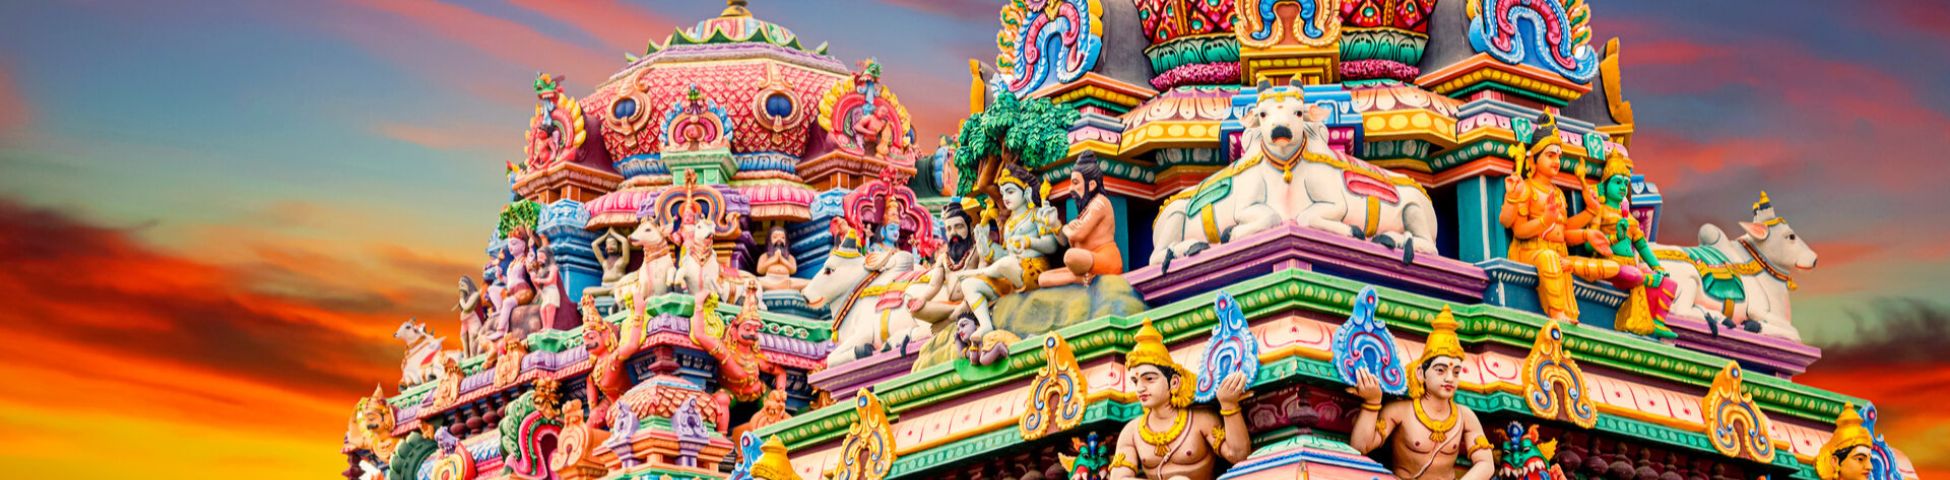 Top Selling South India Religious Tour Package